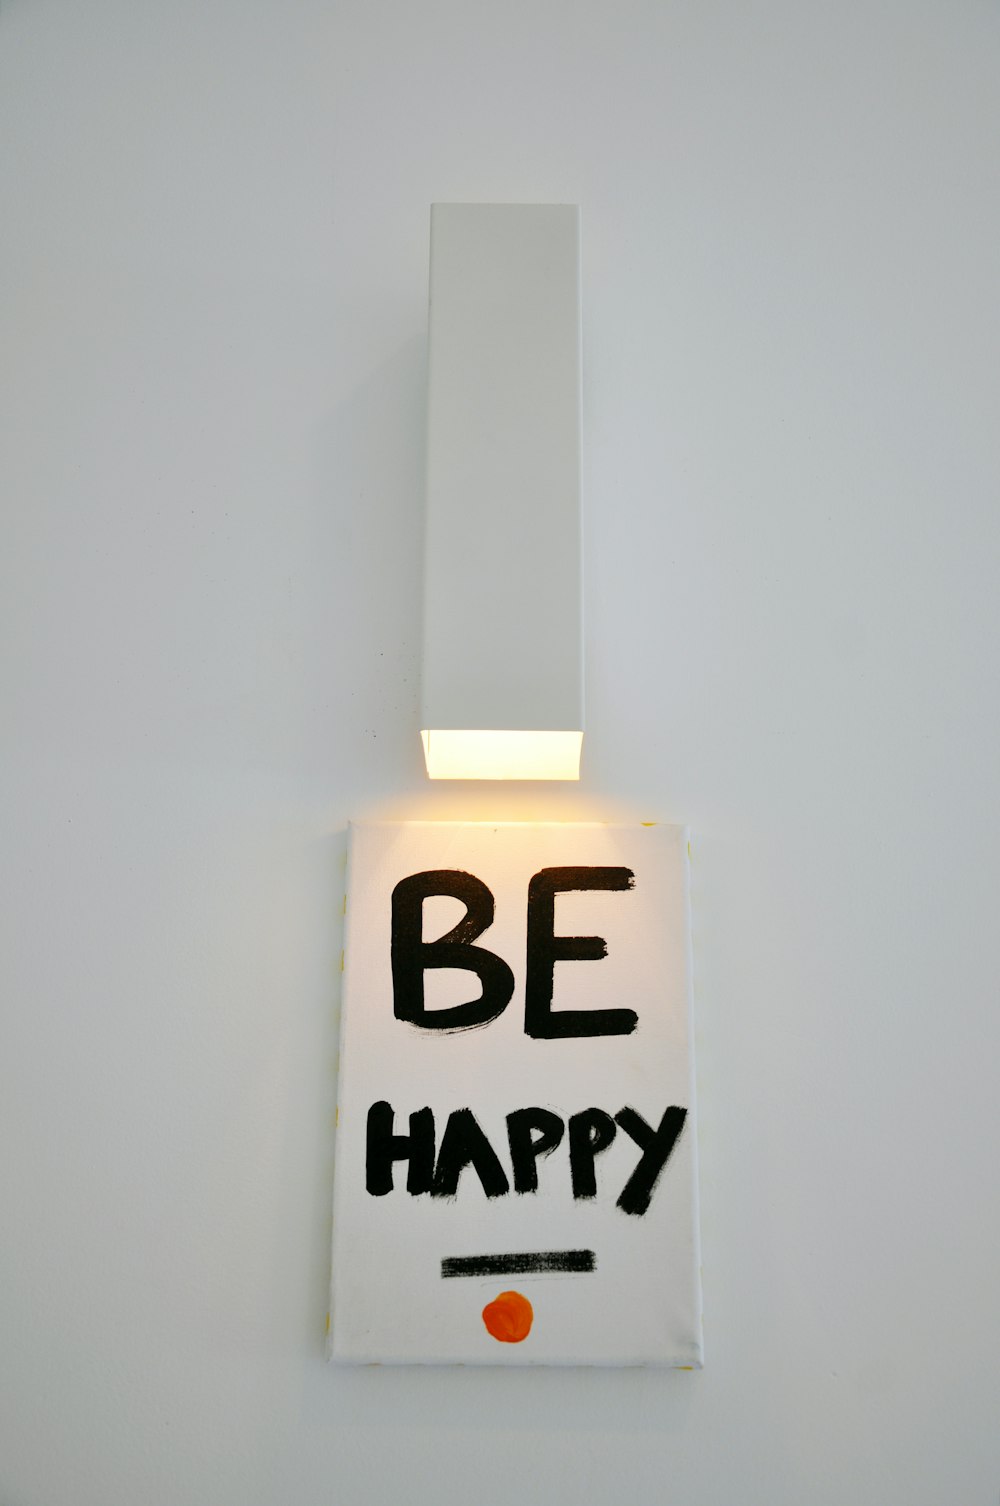 be happy sign on white surface